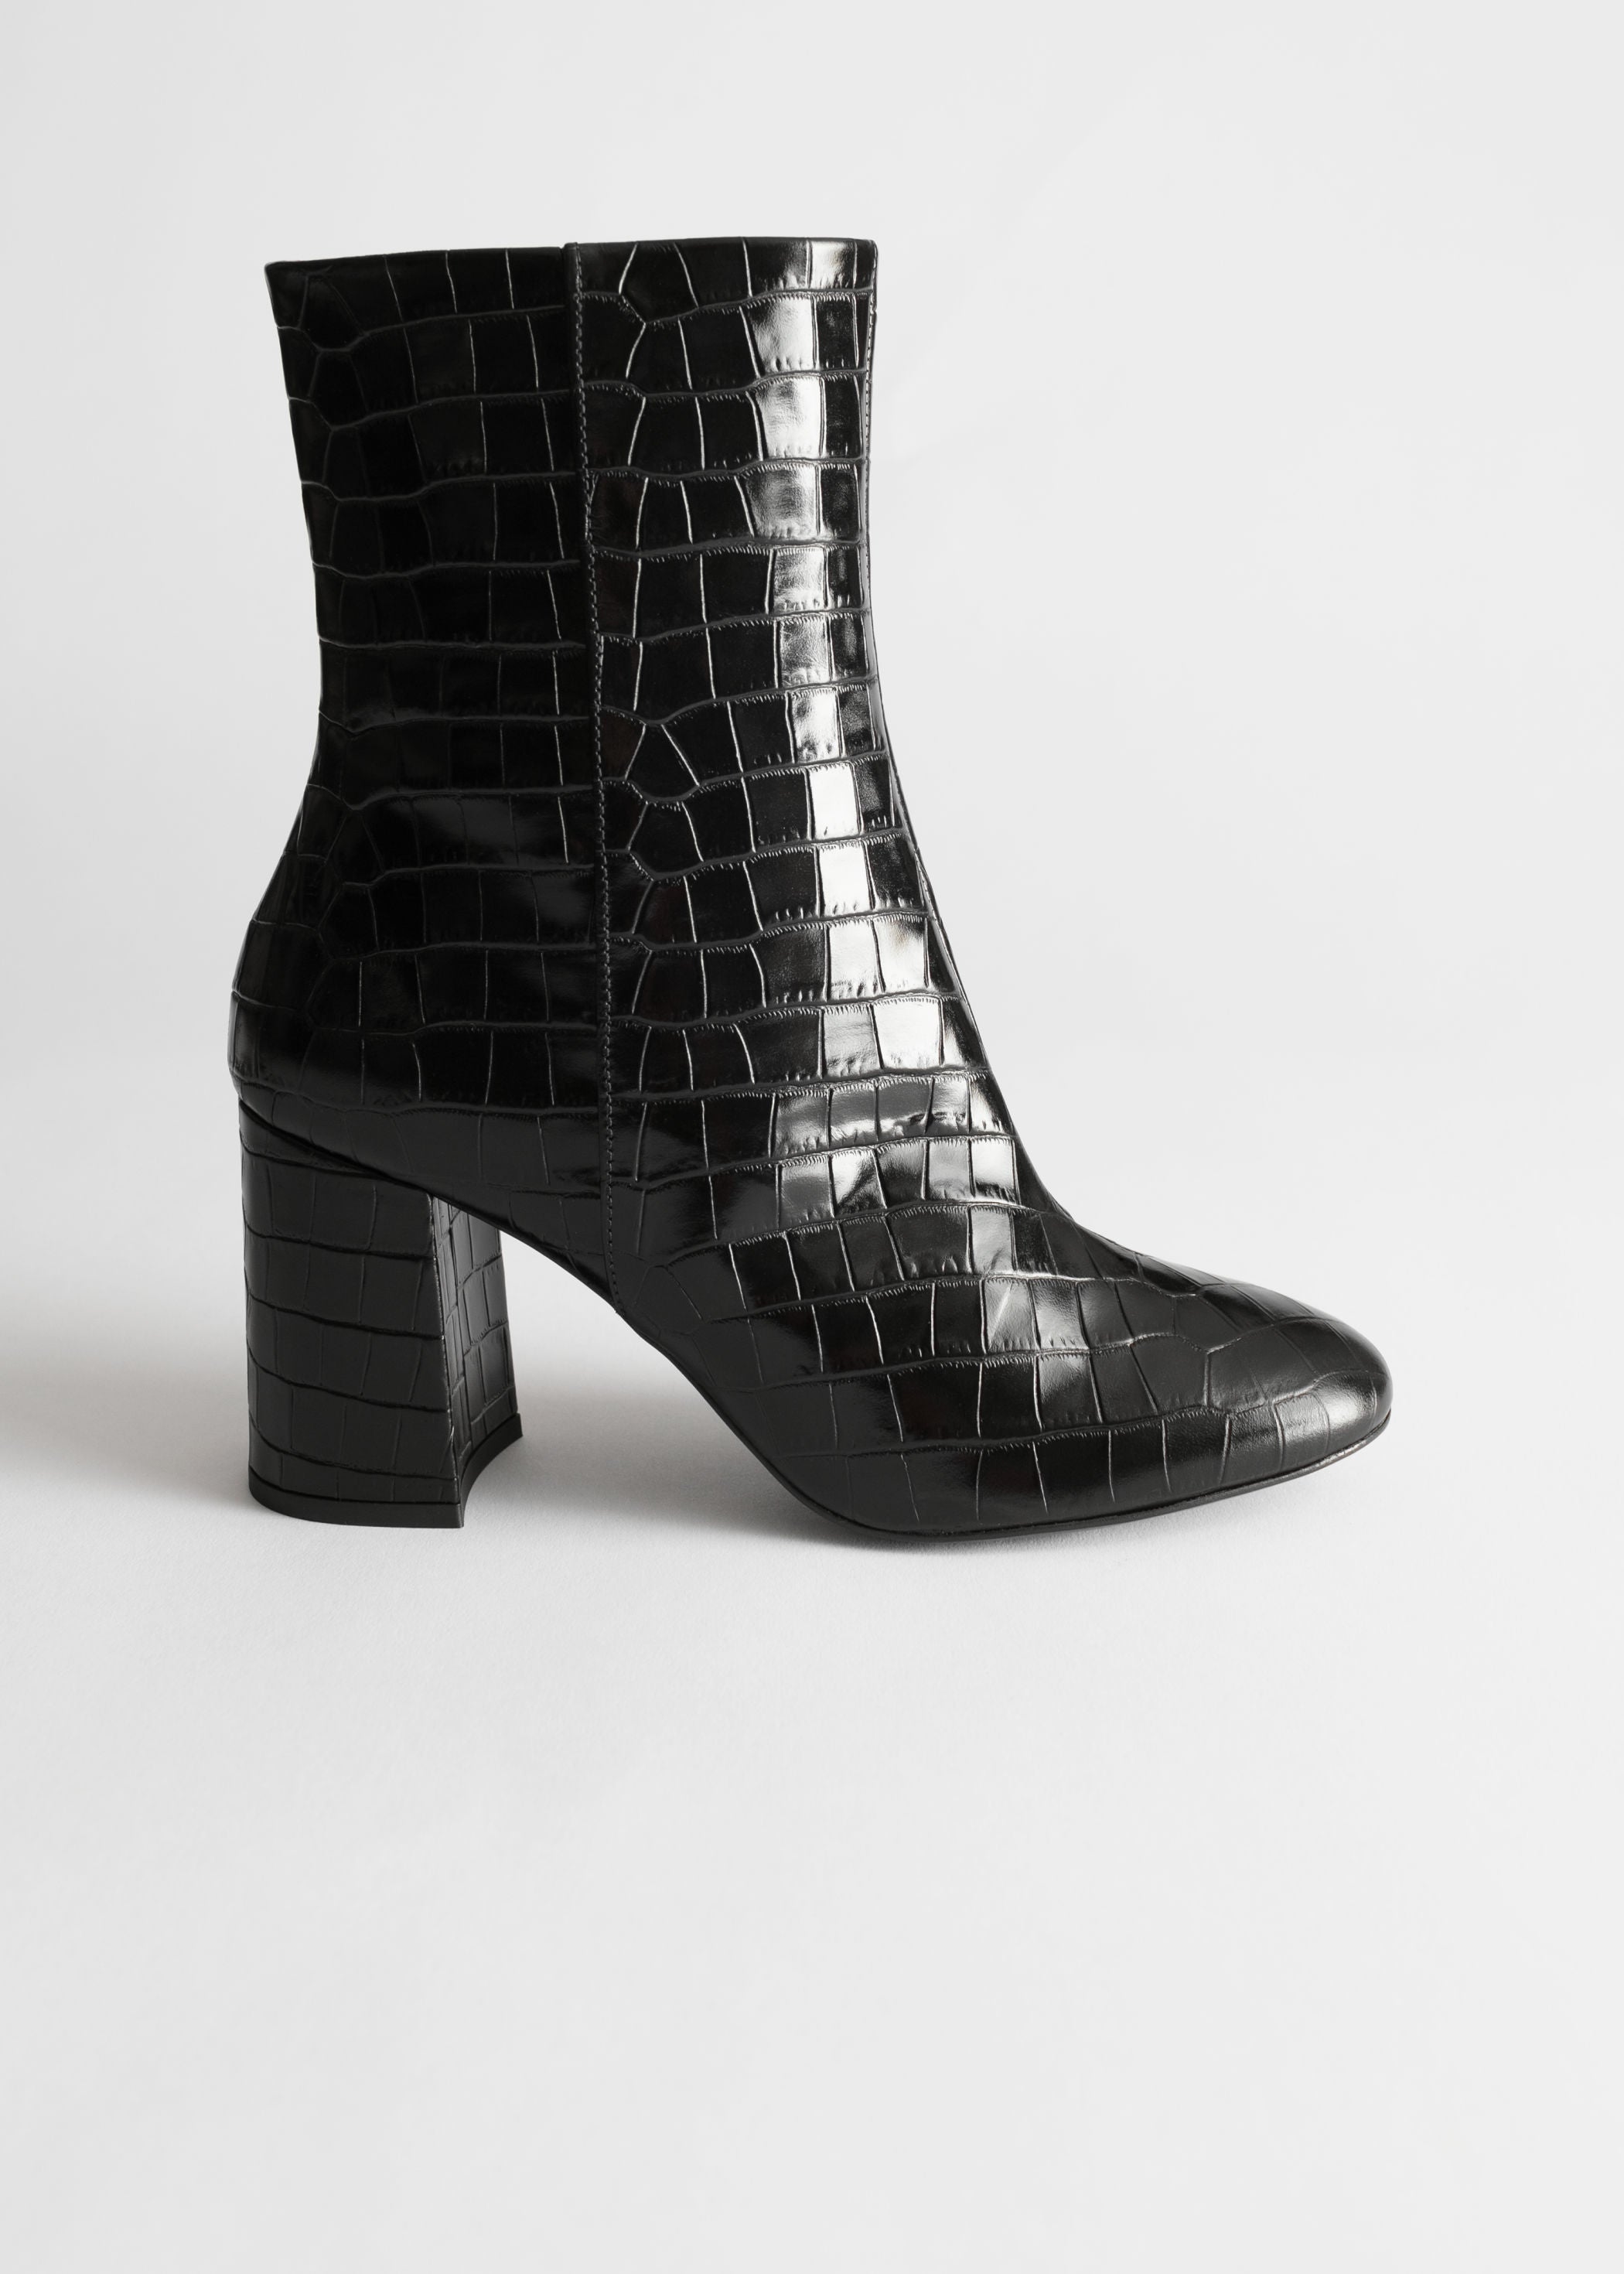 & Other Stories + Croc Embossed Leather Ankle Boots